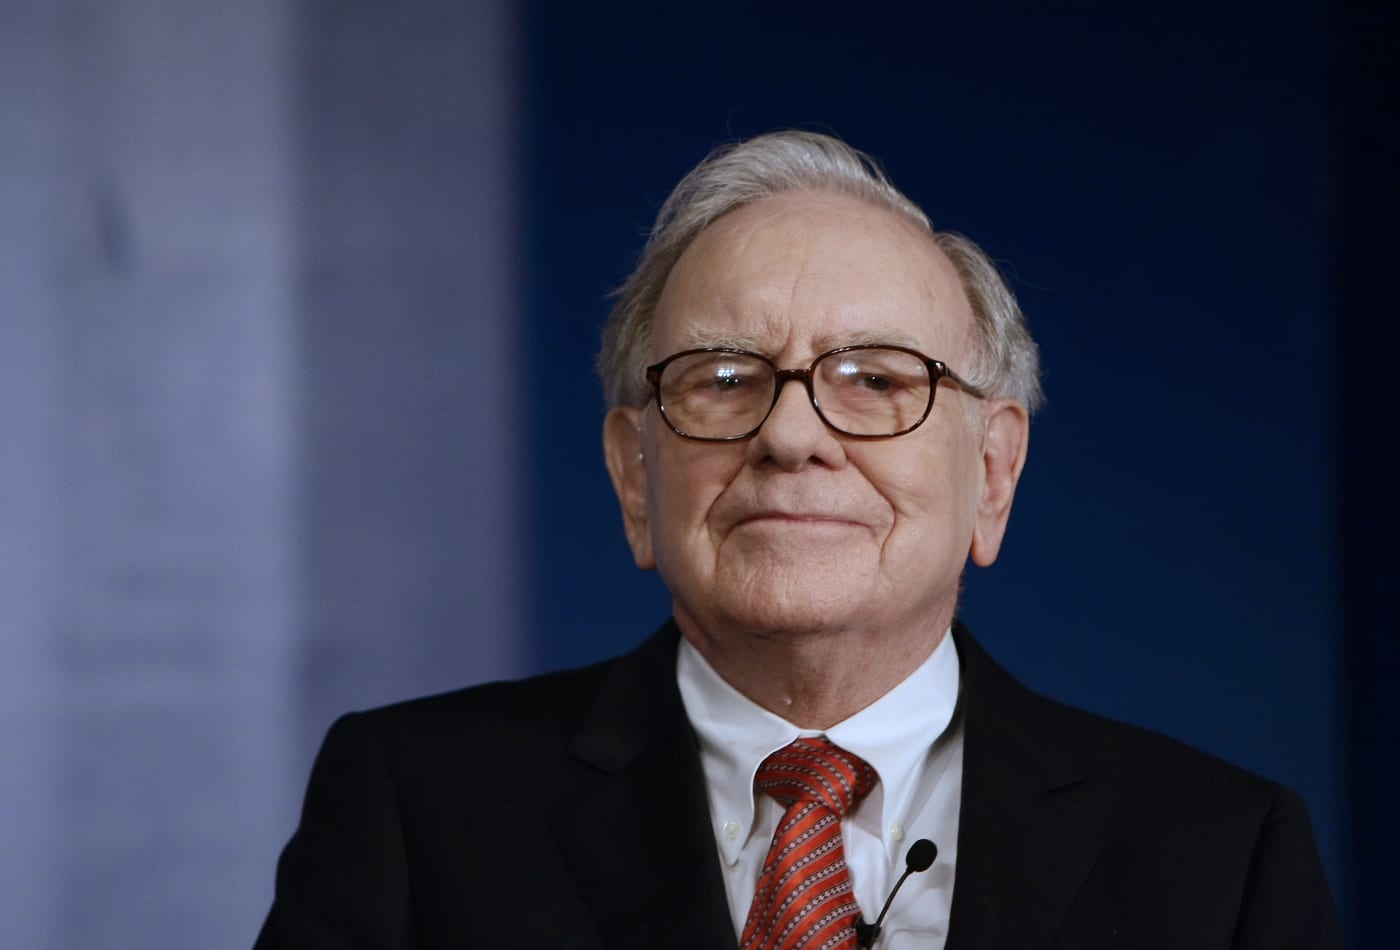 Billionaire Warren Buffett just turned 89—here are 6 pieces of wisdom from the investing legend